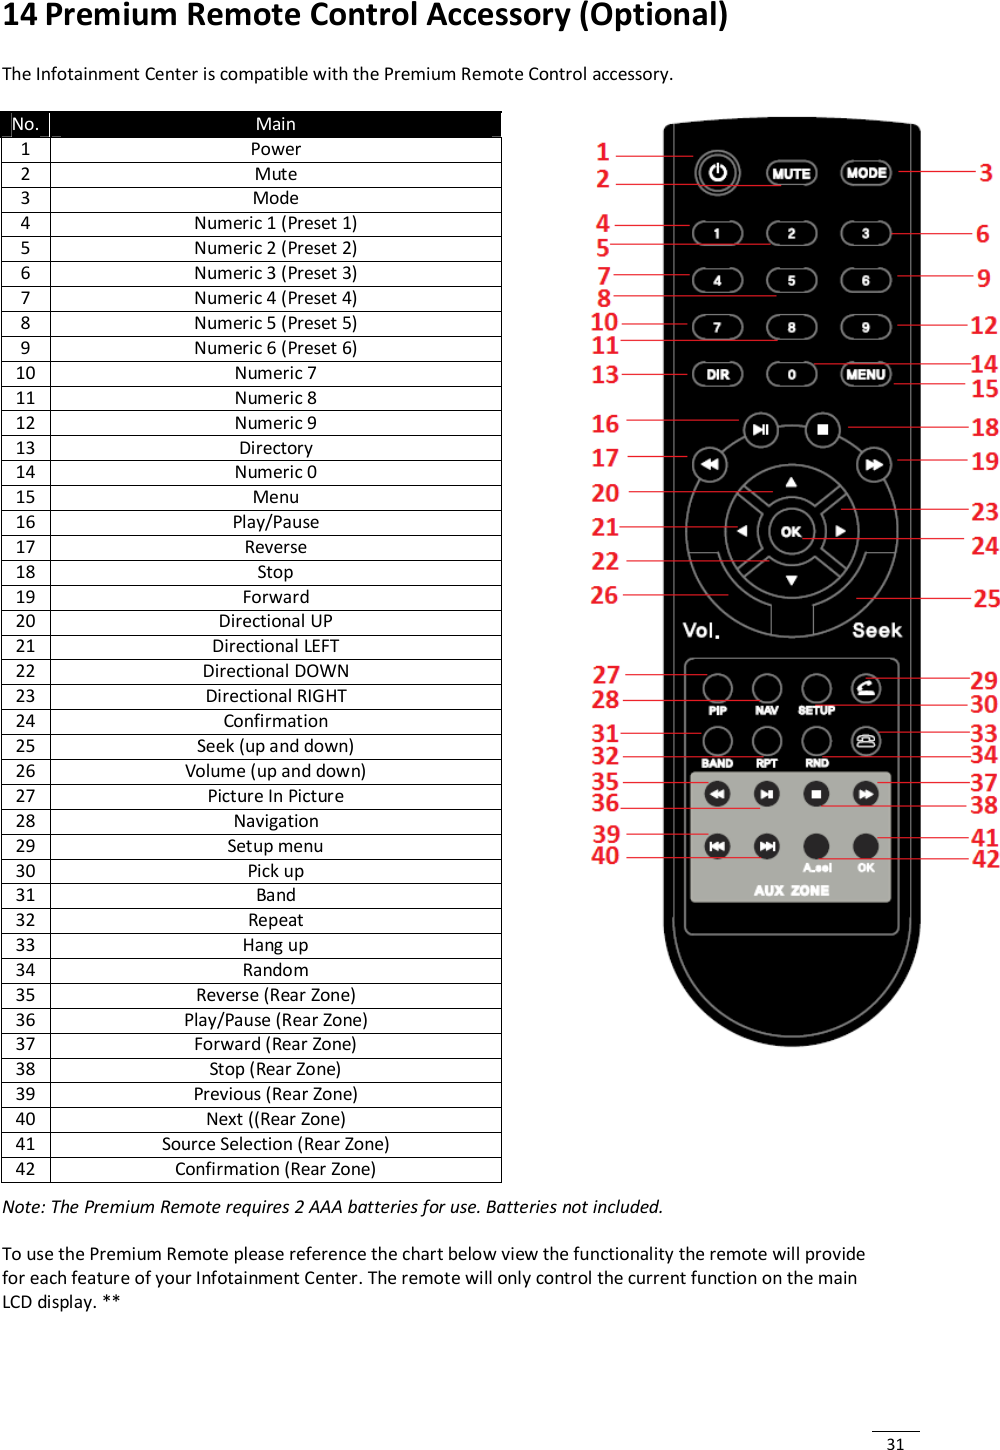  31 14 Premium Remote Control Accessory (Optional)  The Infotainment Center is compatible with the Premium Remote Control accessory.         Note: The Premium Remote requires 2 AAA batteries for use. Batteries not included.  To use the Premium Remote please reference the chart below view the functionality the remote will provide for each feature of your Infotainment Center. The remote will only control the current function on the main LCD display. **    No. Main 1 Power  2 Mute 3 Mode 4 Numeric 1 (Preset 1) 5 Numeric 2 (Preset 2) 6 Numeric 3 (Preset 3) 7 Numeric 4 (Preset 4) 8 Numeric 5 (Preset 5) 9 Numeric 6 (Preset 6) 10 Numeric 7  11 Numeric 8  12 Numeric 9  13 Directory 14 Numeric 0 15 Menu 16 Play/Pause 17 Reverse 18 Stop 19 Forward 20 Directional UP 21 Directional LEFT 22 Directional DOWN 23 Directional RIGHT 24 Confirmation 25 Seek (up and down) 26 Volume (up and down) 27 Picture In Picture 28 Navigation 29 Setup menu 30 Pick up 31 Band 32 Repeat 33 Hang up 34 Random 35 Reverse (Rear Zone) 36 Play/Pause (Rear Zone) 37 Forward (Rear Zone) 38 Stop (Rear Zone) 39 Previous (Rear Zone) 40 Next ((Rear Zone) 41 Source Selection (Rear Zone) 42 Confirmation (Rear Zone) 